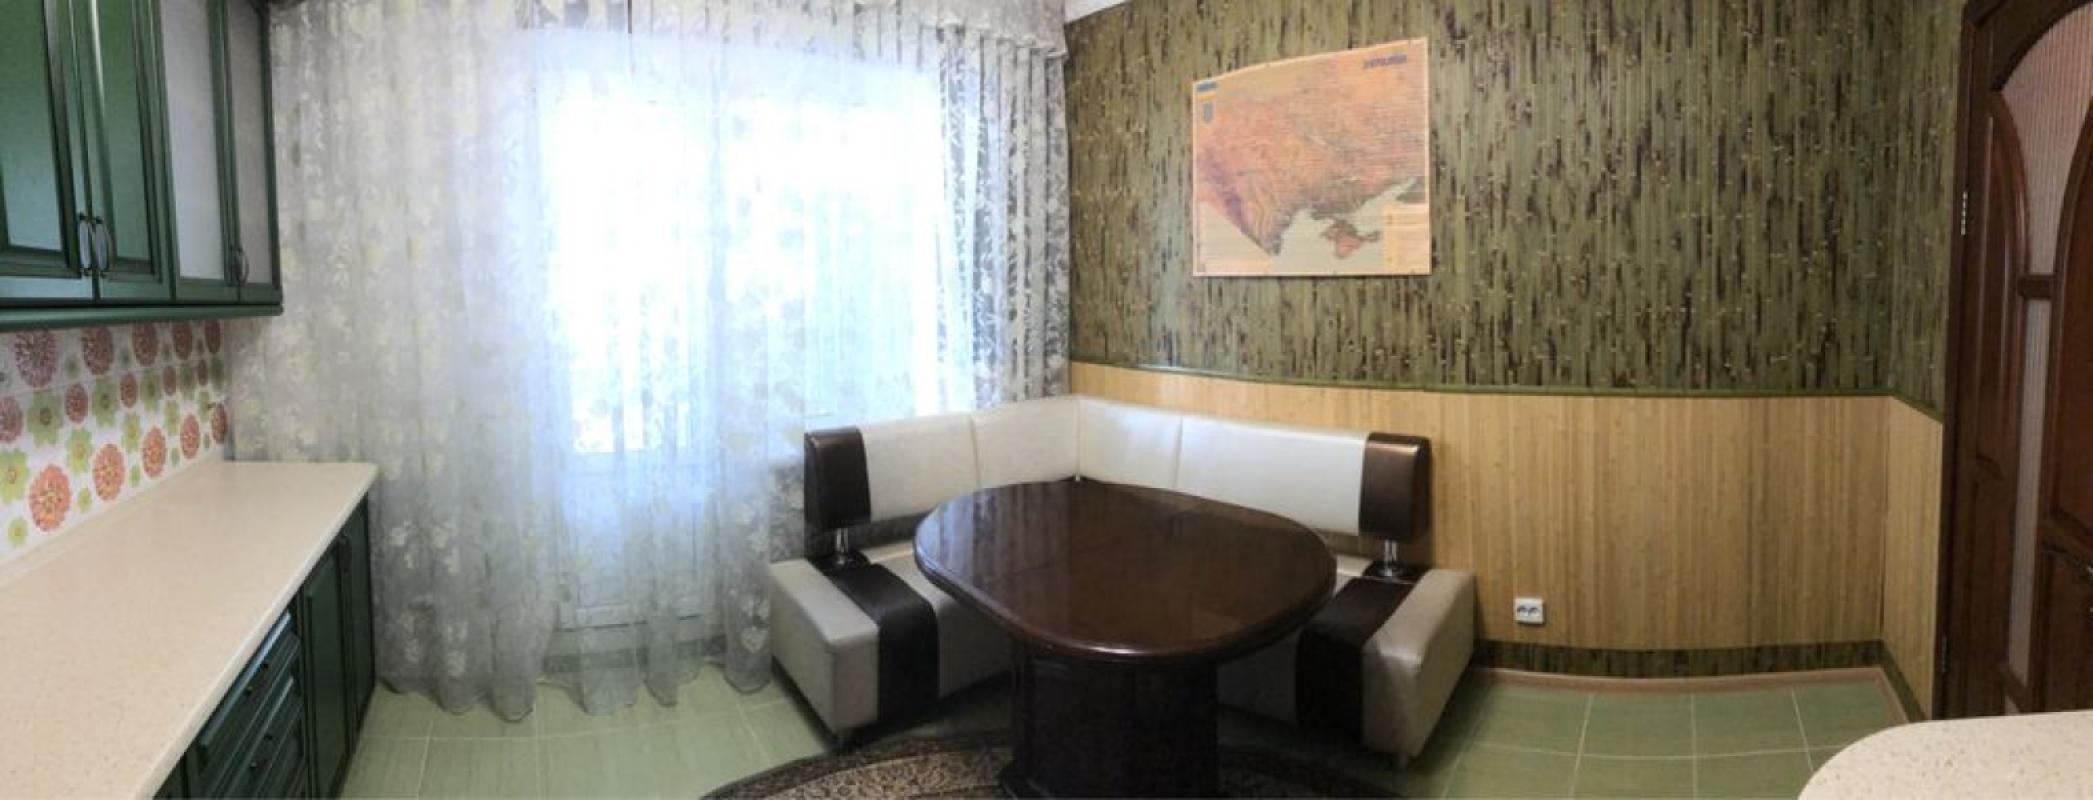 Long term rent 3 bedroom-(s) apartment Oleny Pchilky Street 2б